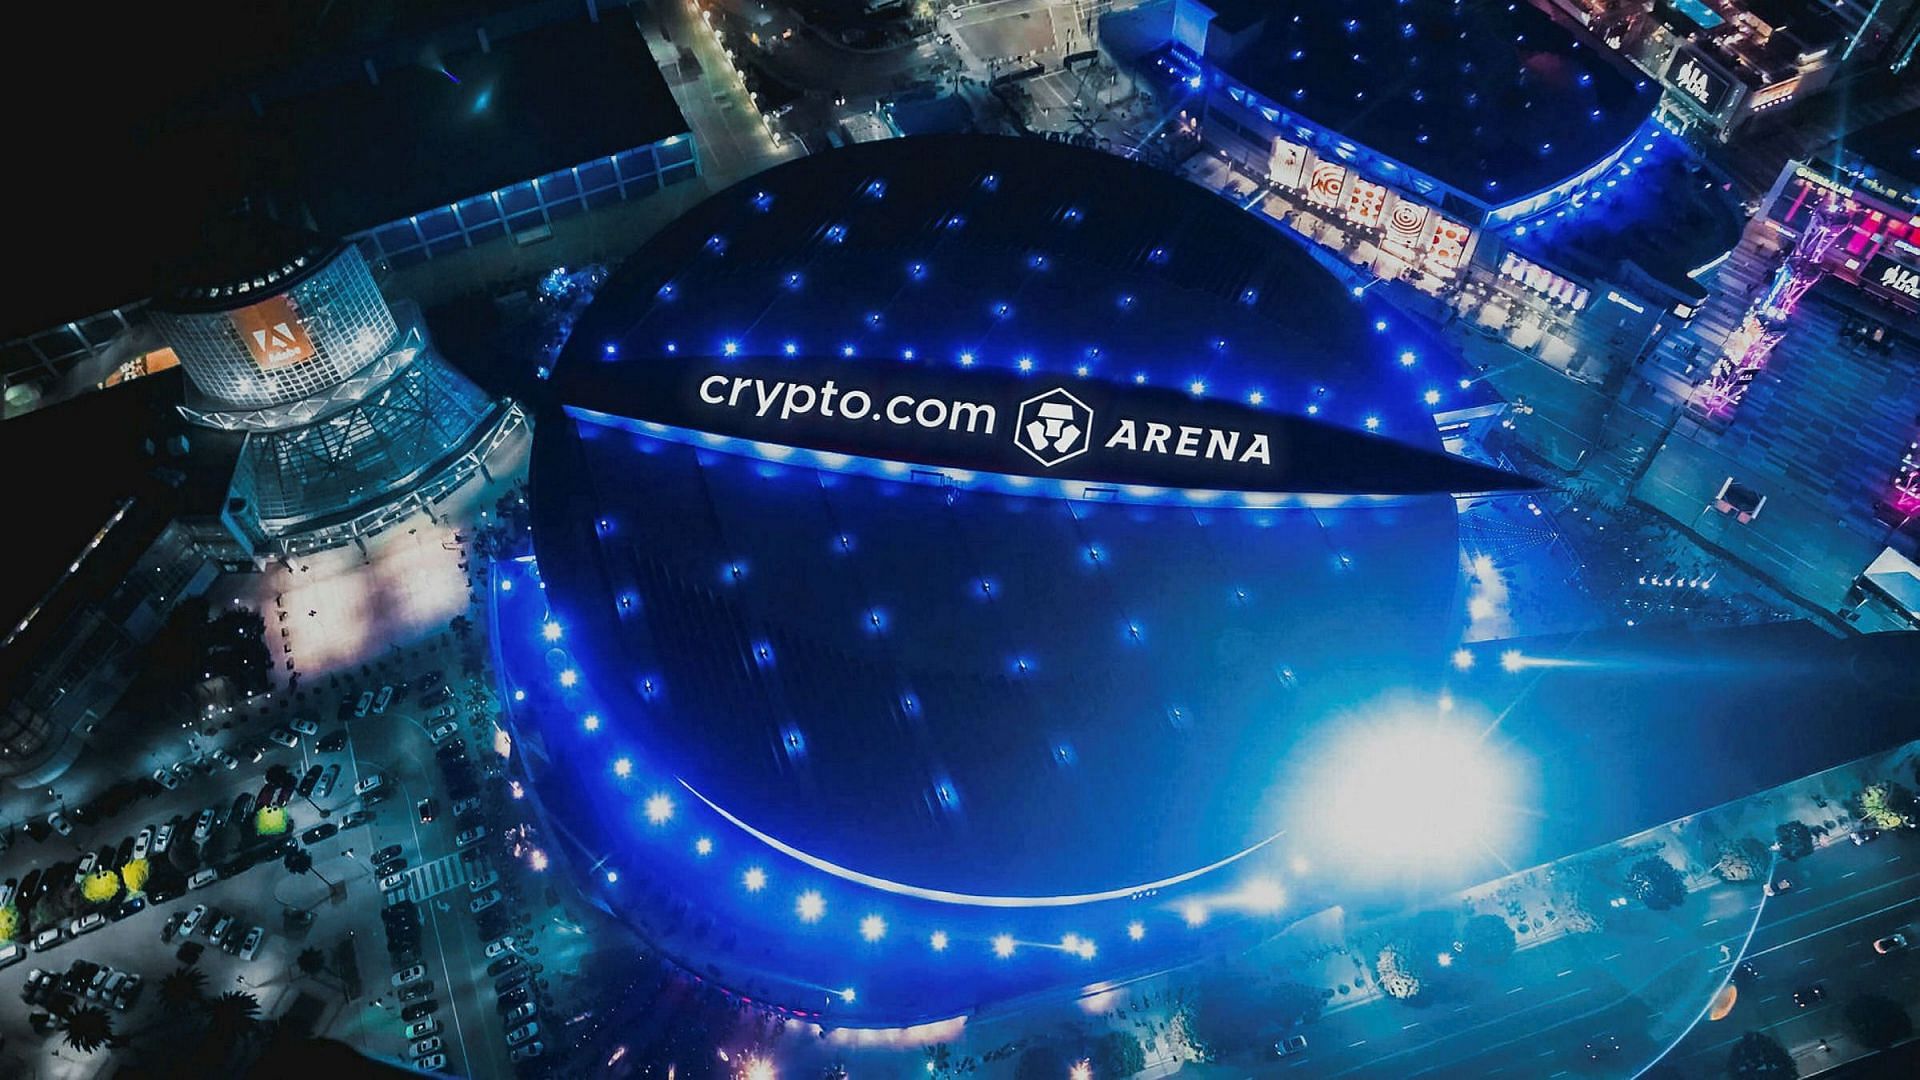 Christmas in Los Angeles will be more eventful than usual with the renaming of the Staples Center to Crypto.com Arena officially announced [Photo: Financial Times]